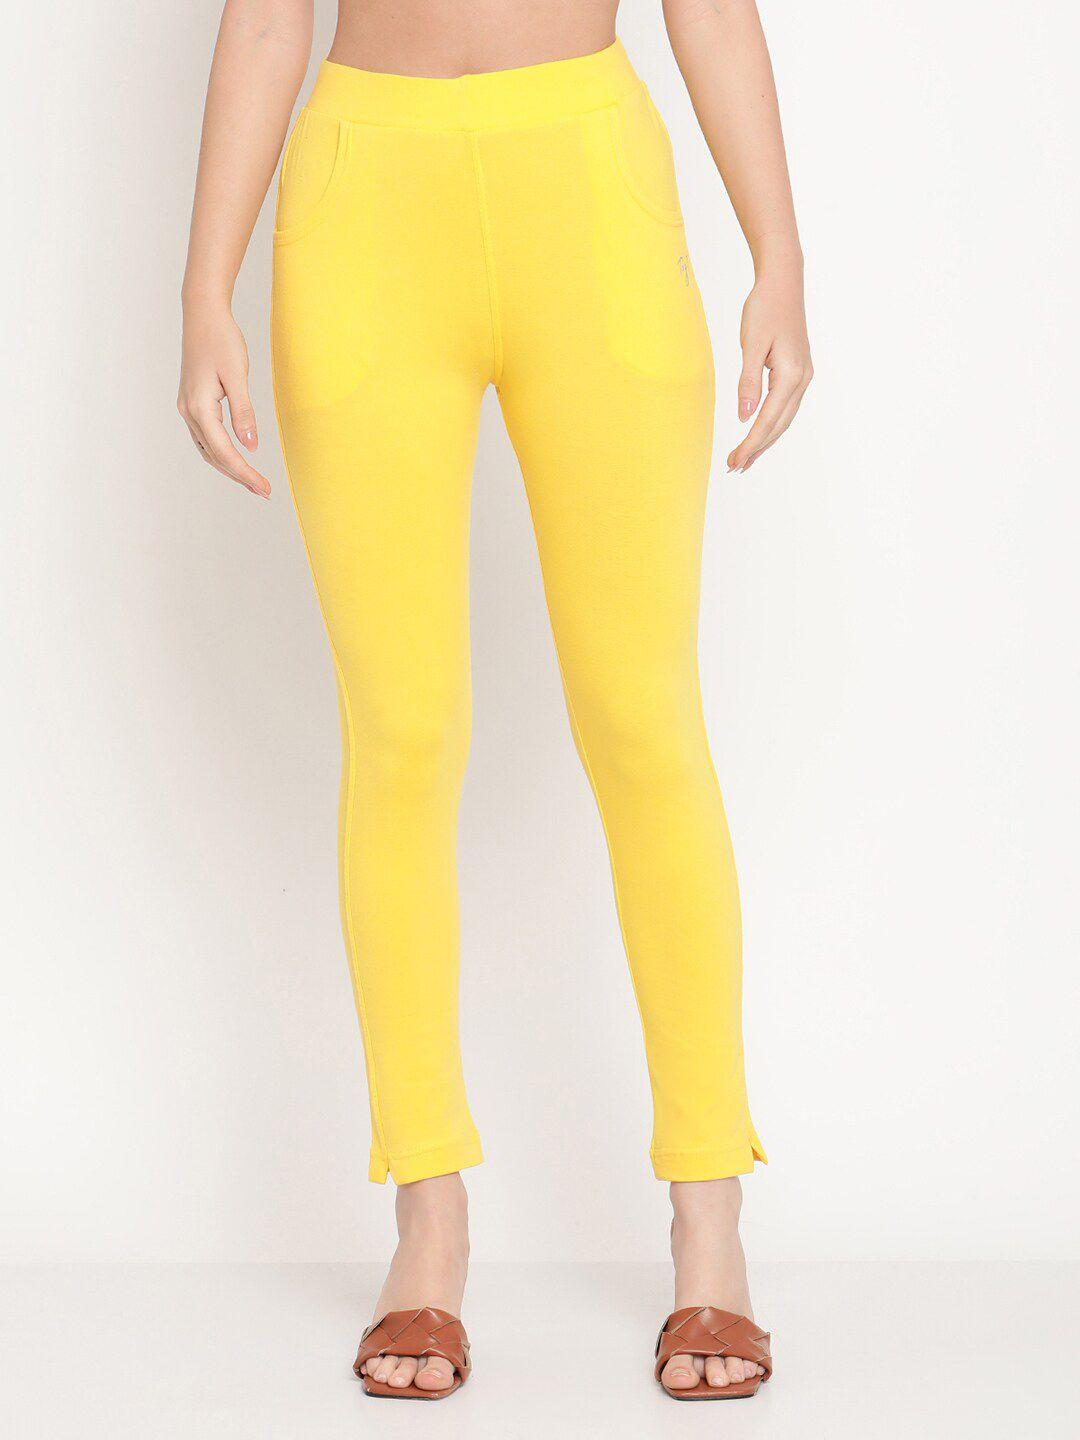 tag-7-women-yellow-solid-jeggings